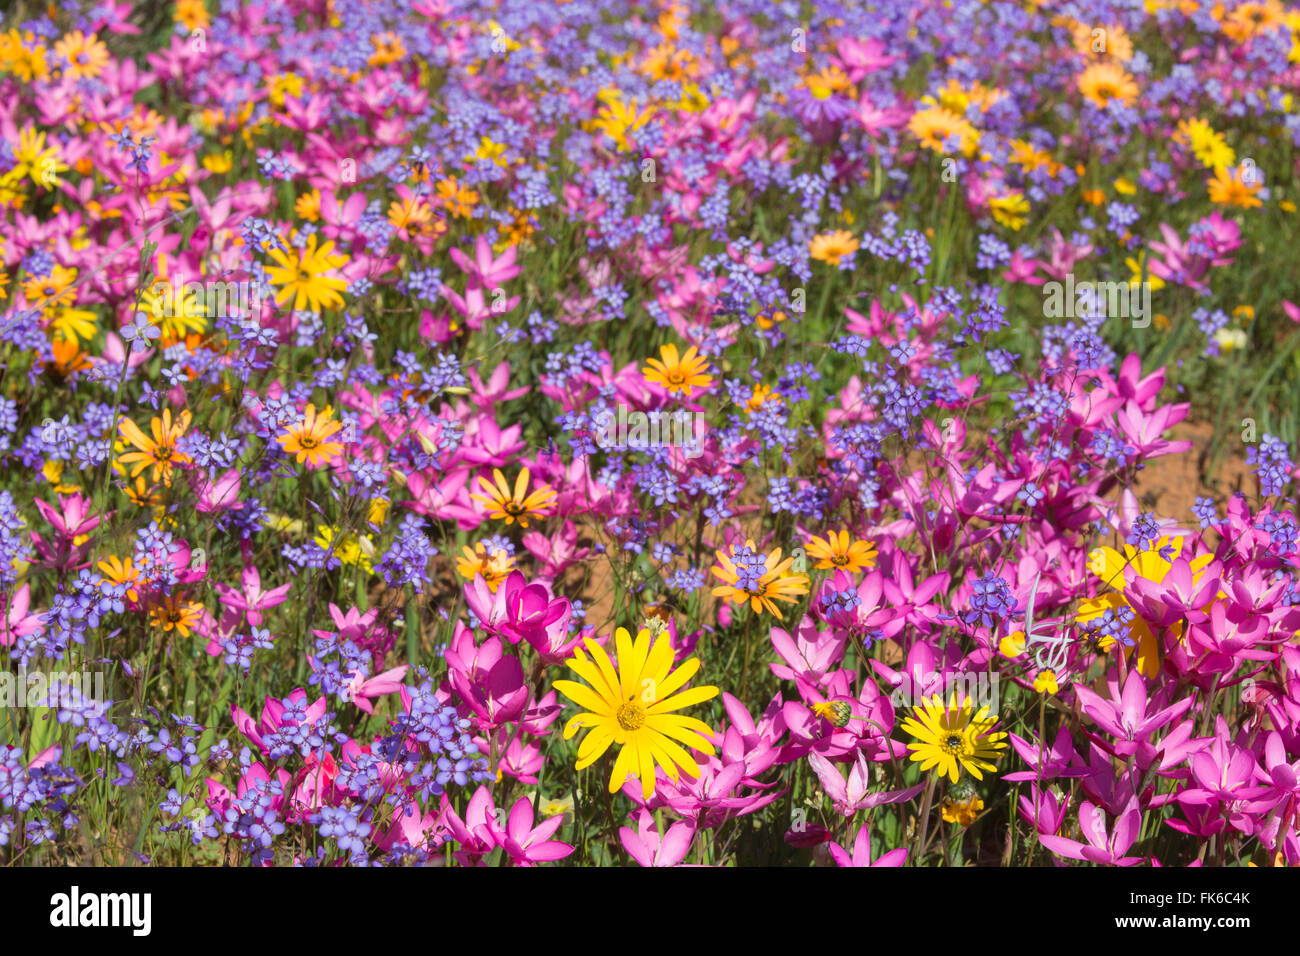 Spring wildflowers, Papkuilsfontein farm, Nieuwoudtville, Northern Cape, South Africa, Africa Stock Photo